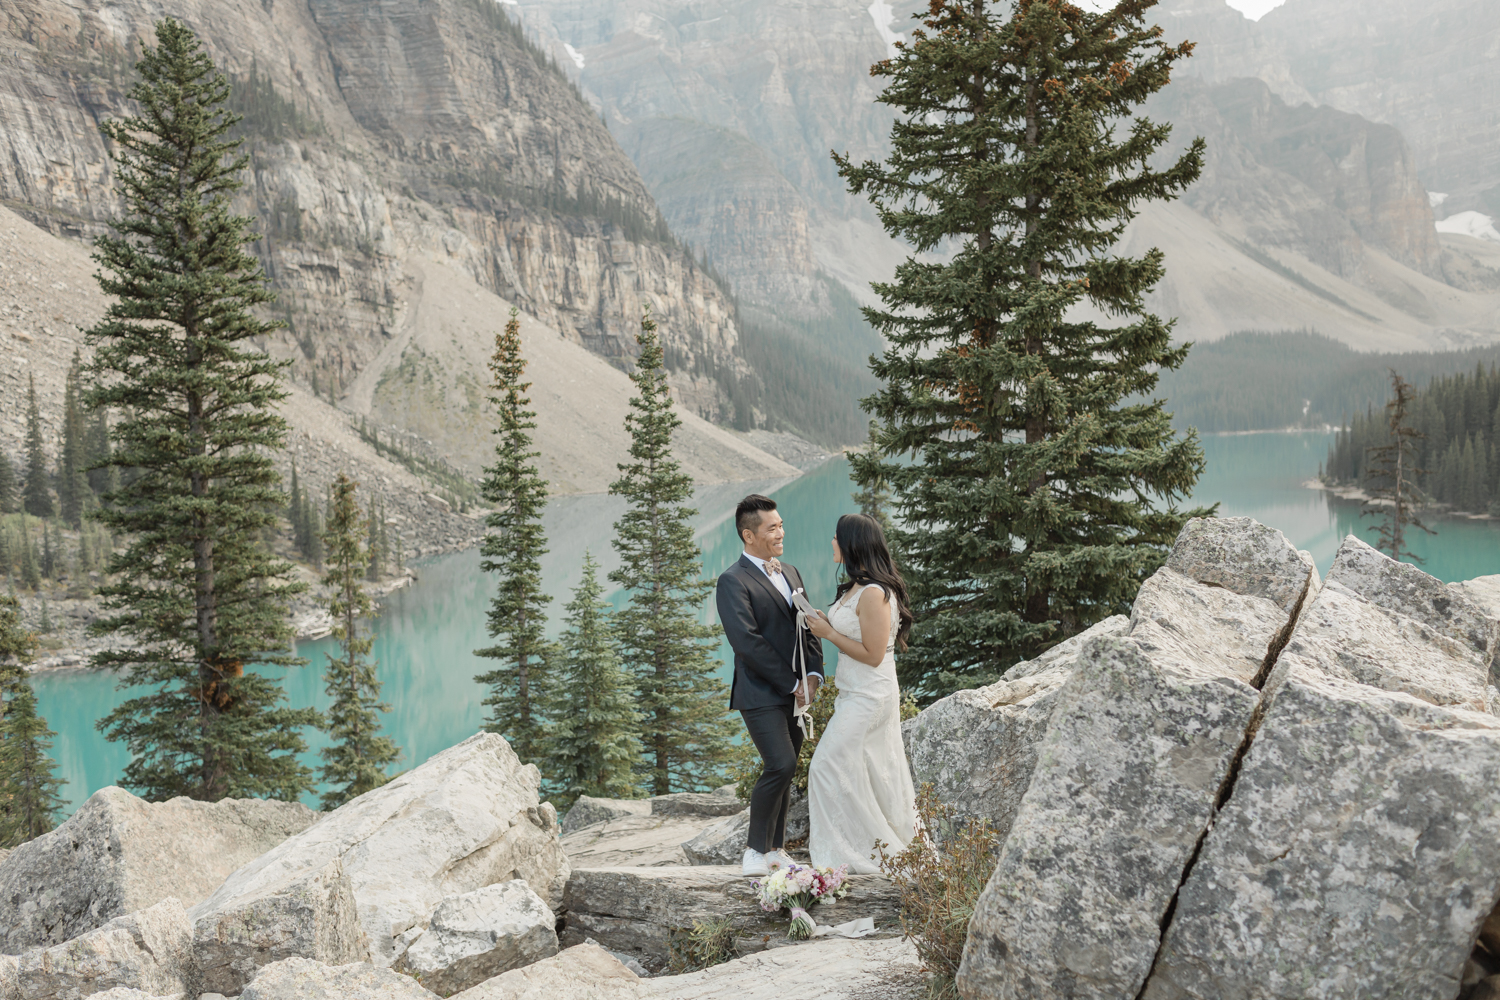 Elopement in Banff National Park couples ceremony 